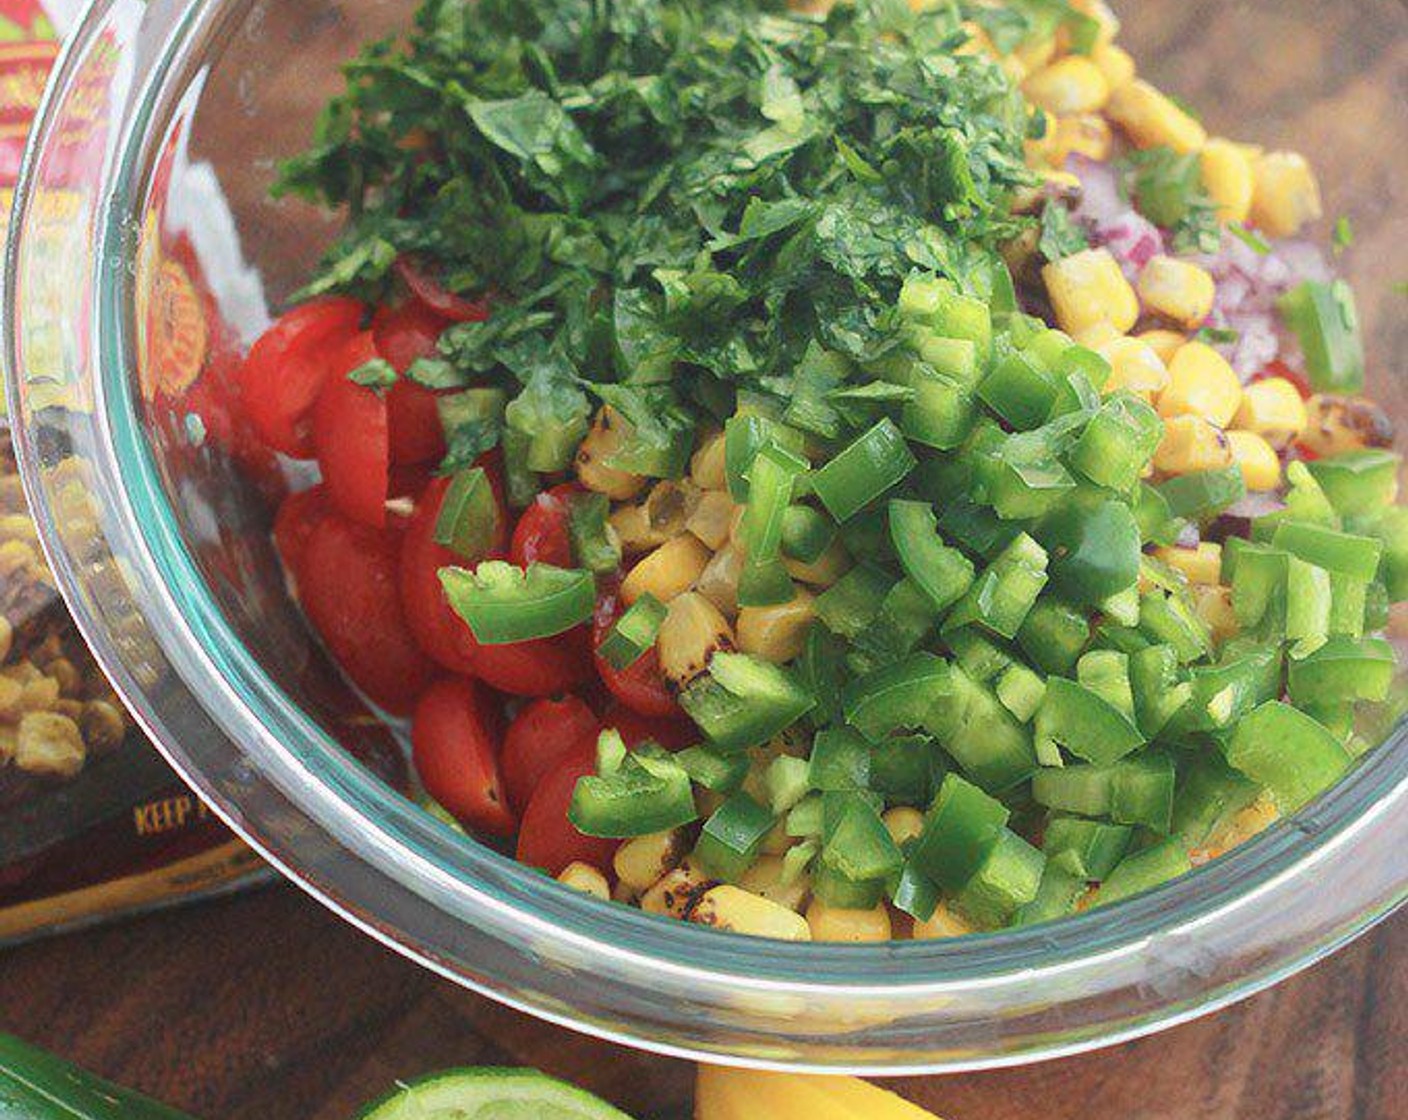 step 1 In a medium bowl, combine Grape Tomatoes (1 1/3 cups), Fire Roasted Corn Kernels (1 cup), Red Onion (1/3 cup), Garlic (2 cloves), Jalapeño Pepper (1) and Fresh Cilantro (1/4 cup). Add zest and juice from Lime (1) and Sea Salt (1/2 tsp). Stir to combine.